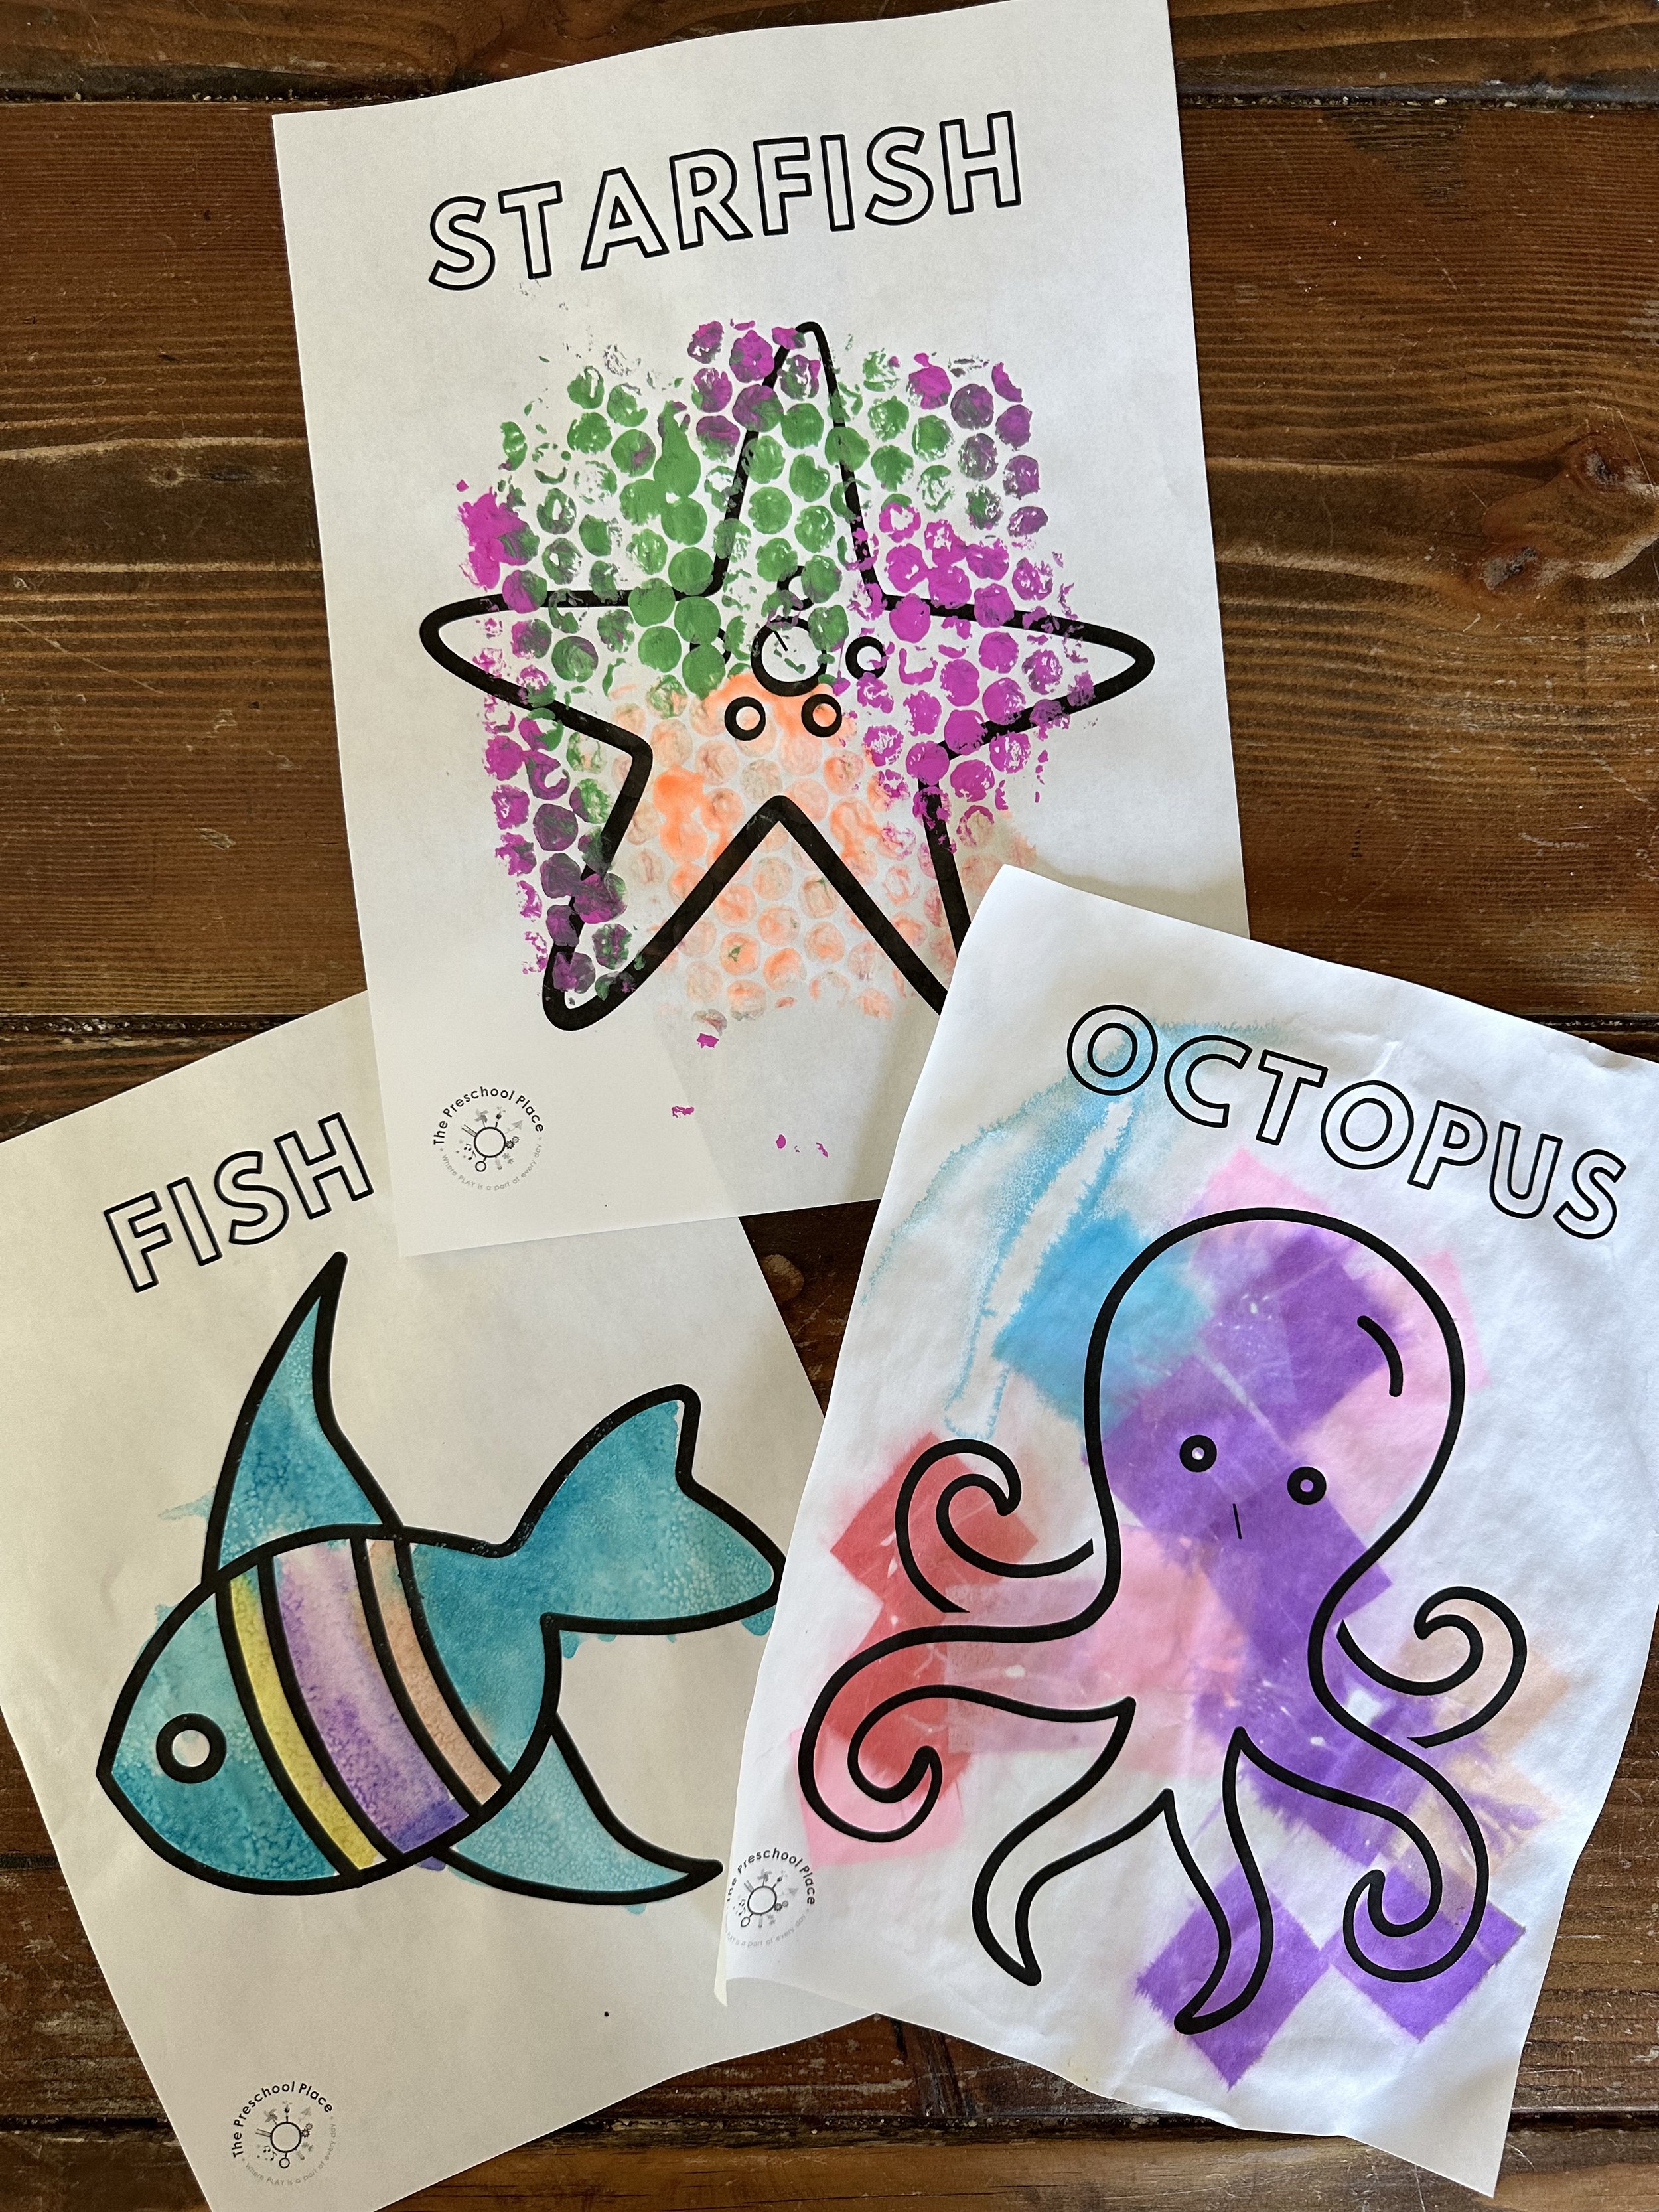 Cool Ocean Art Project for Kids Using Salt and Watercolor Paint